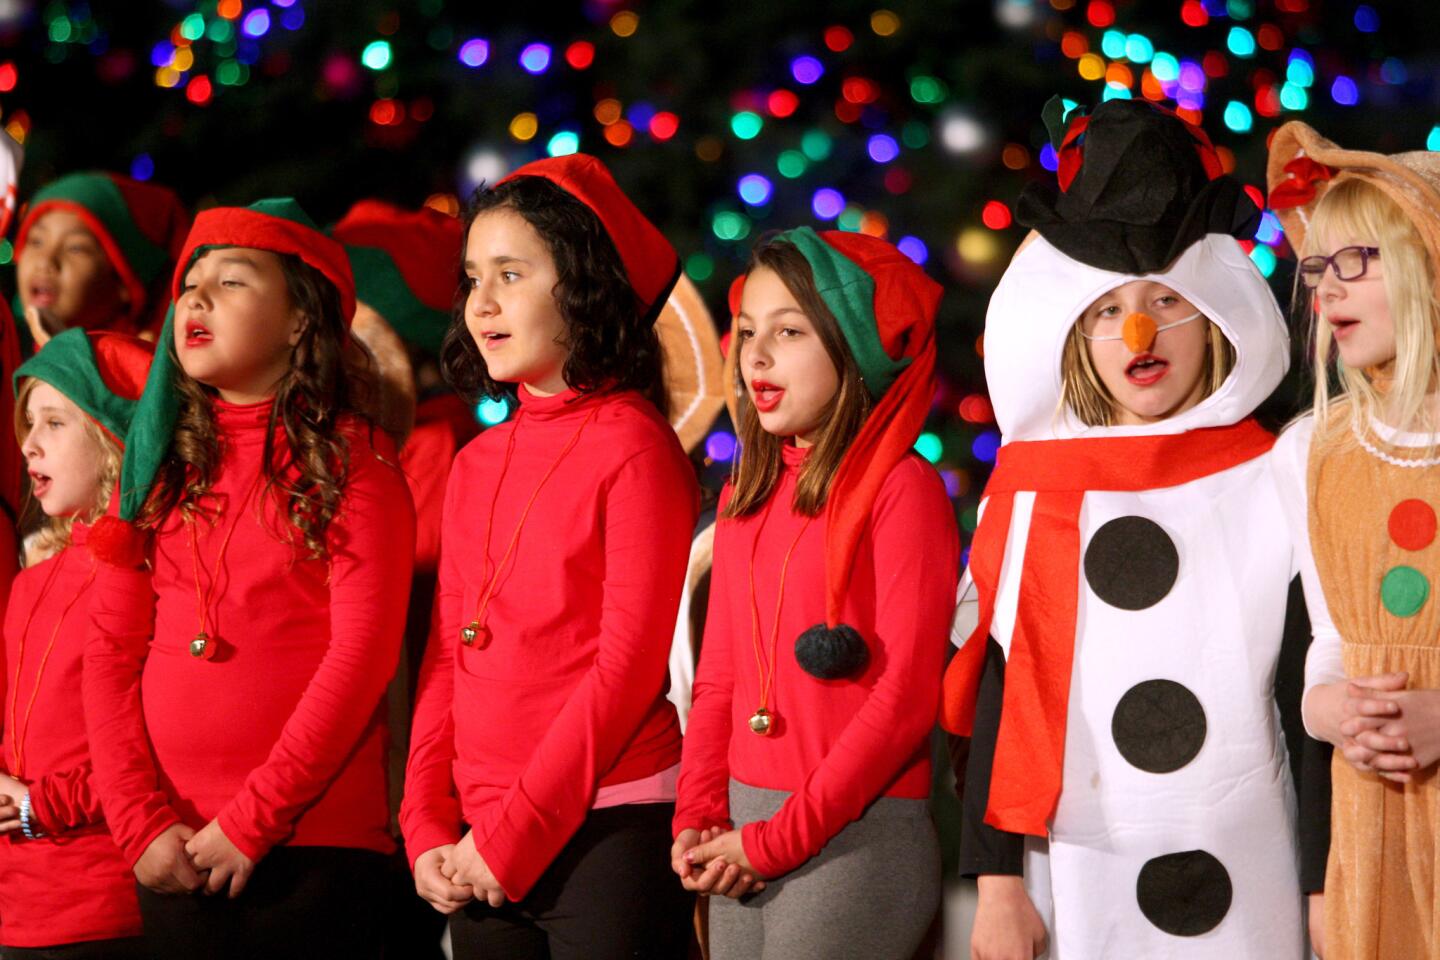 Students from Columbus Elementary School sang Christmas songs at the tree lighting ceremony at Perkins Plaza in Glendale on Wednesday, Dec. 2, 2015.